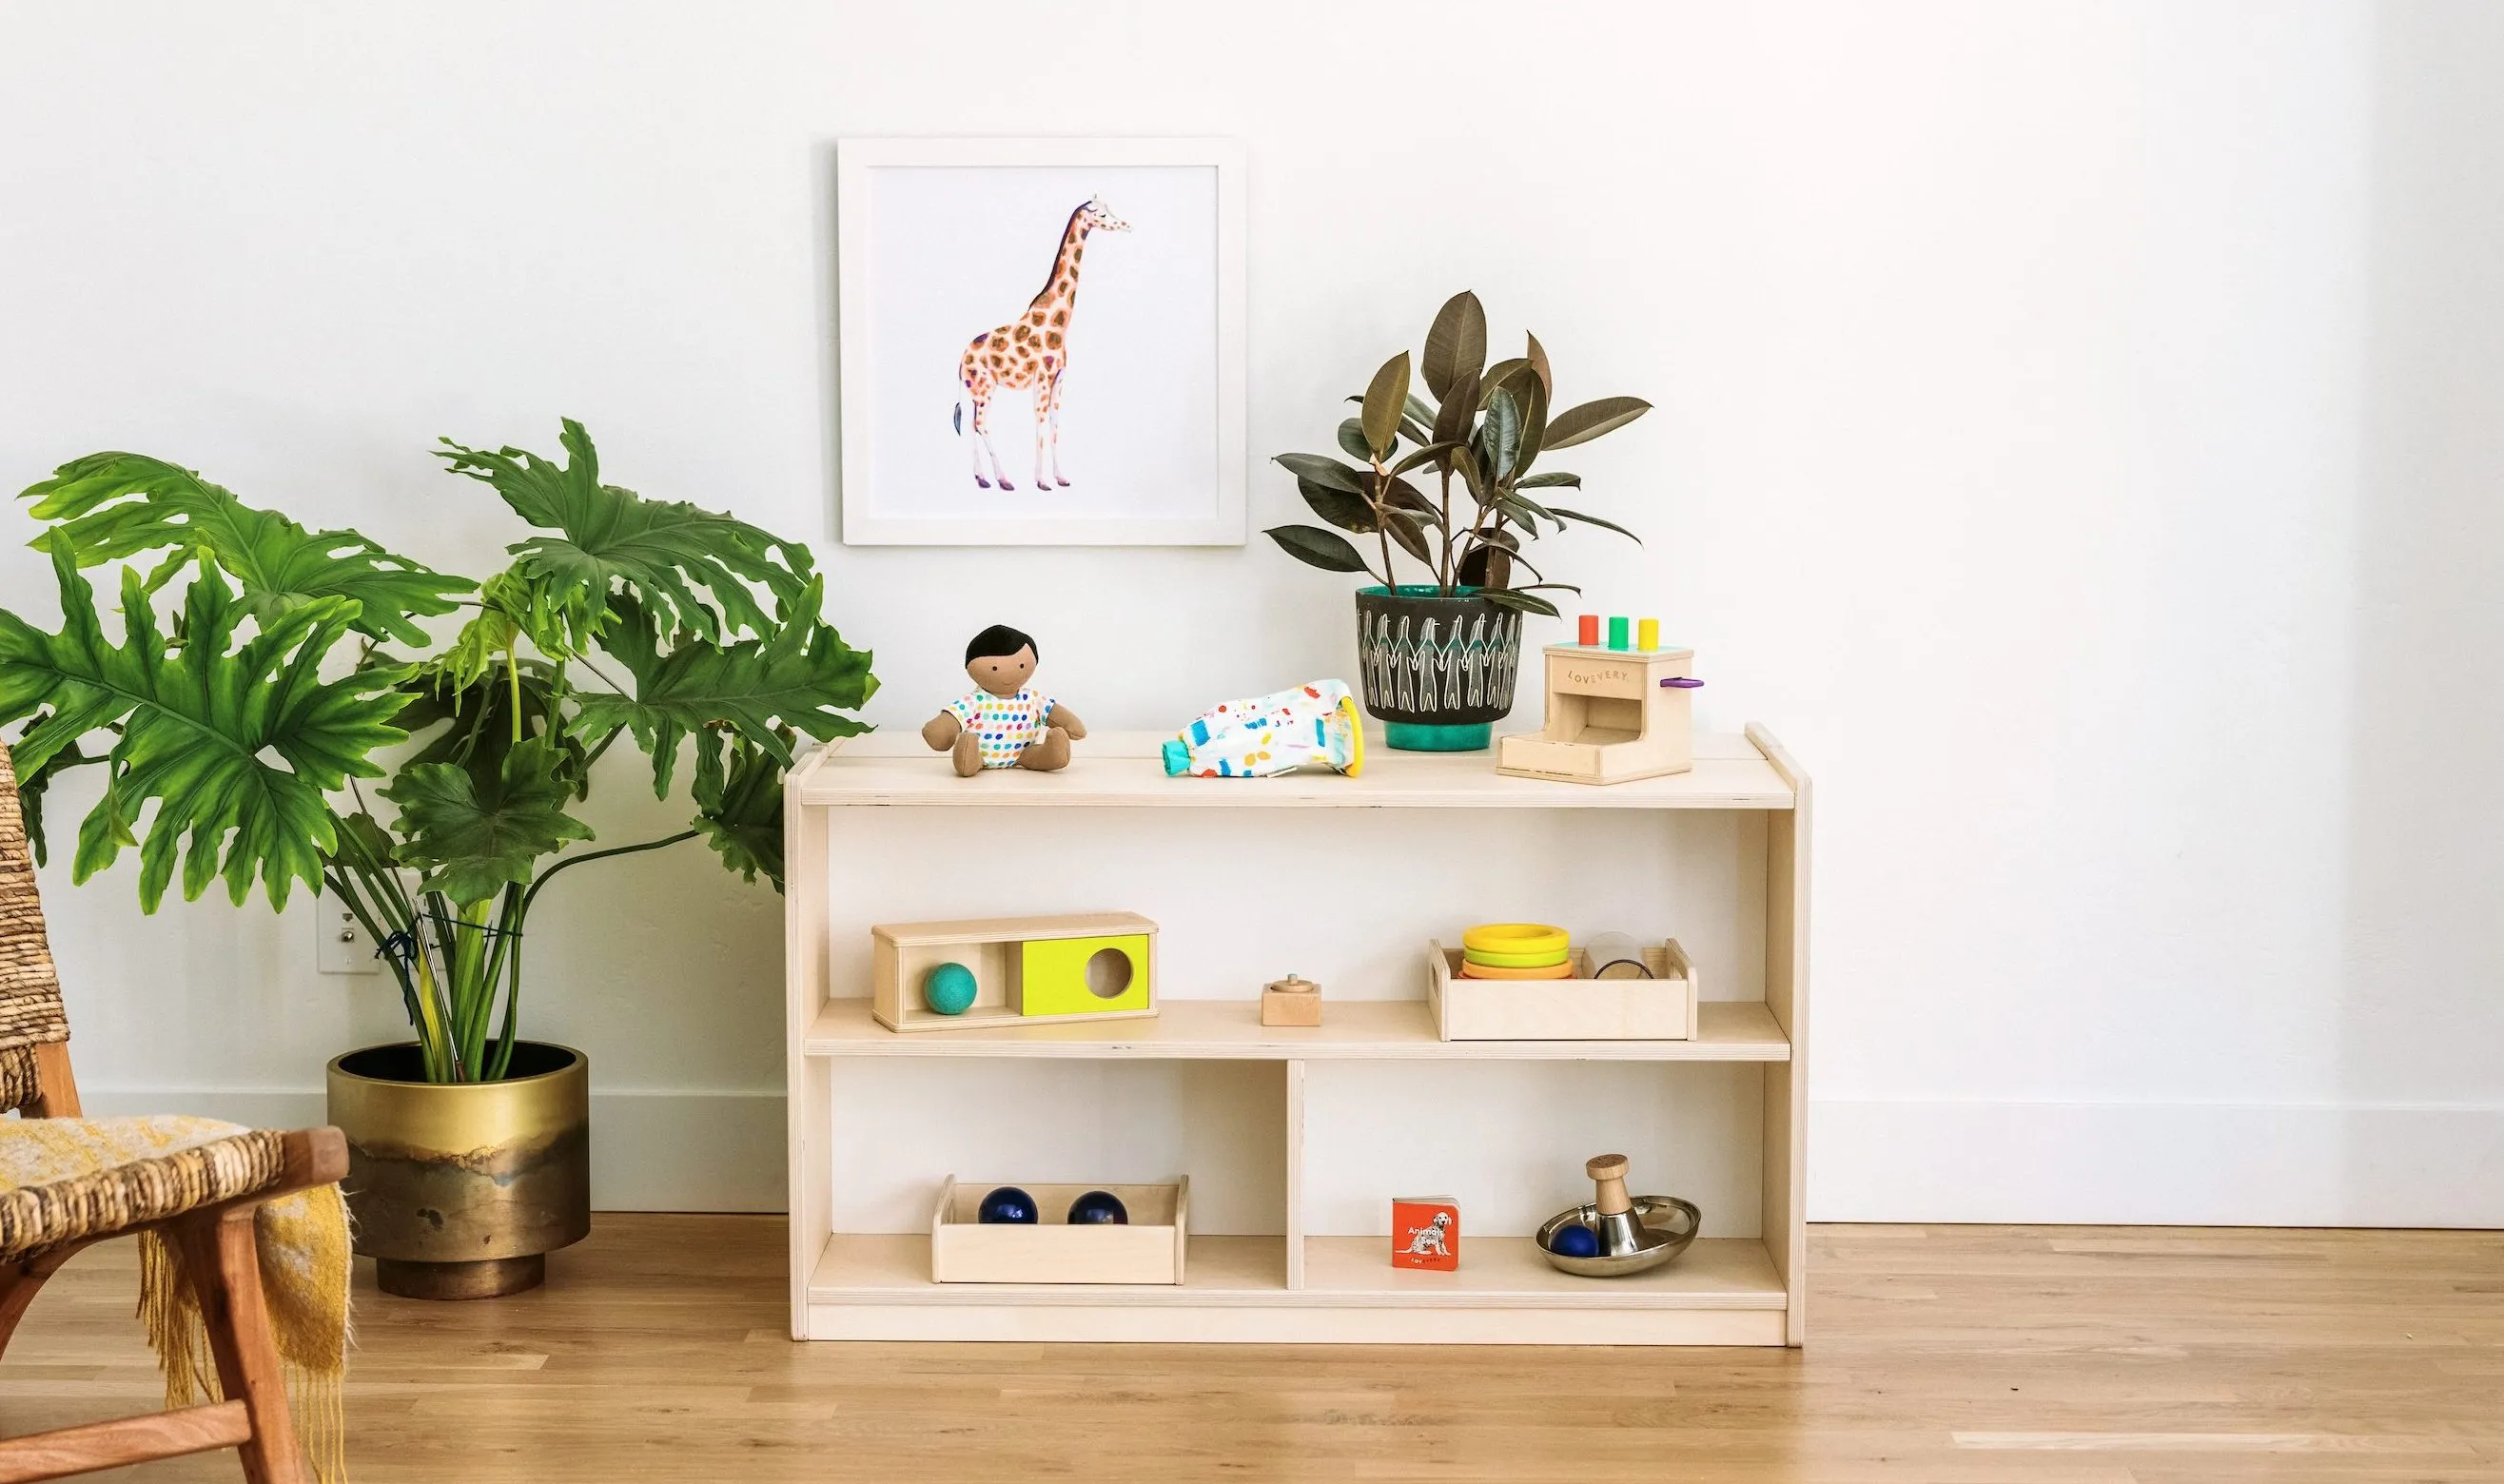 The Montessori Shelf filled with Lovevery playthings